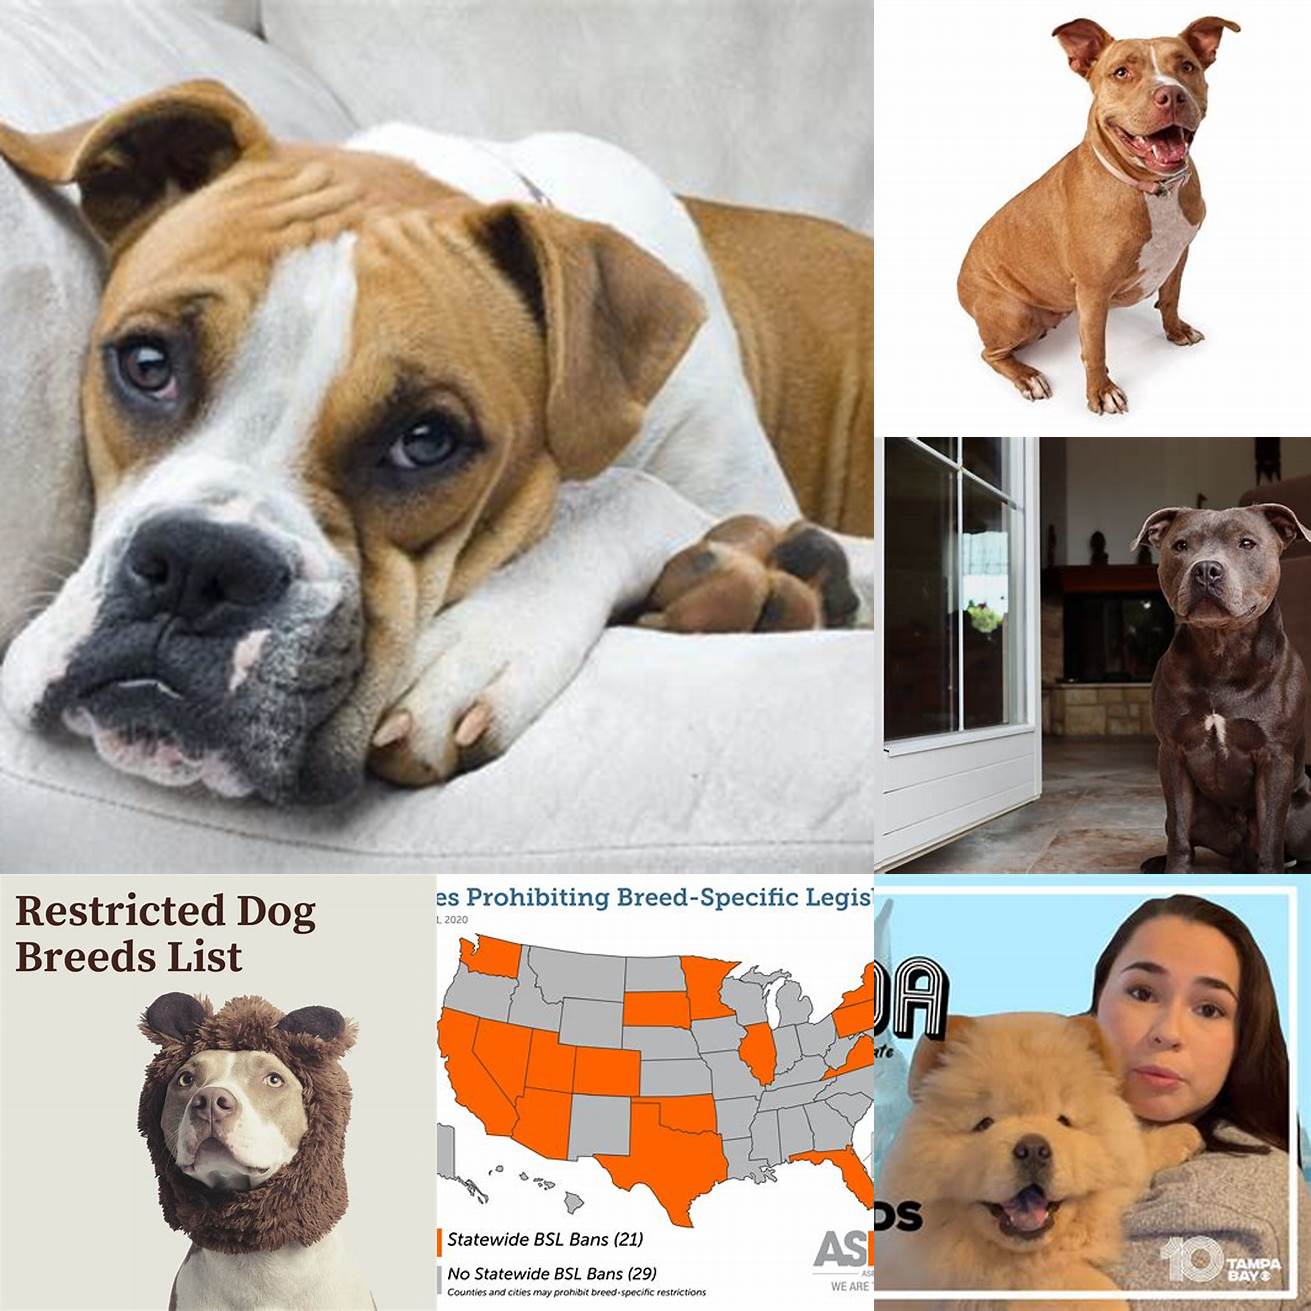 Legal Issues In some areas certain breeds are restricted or require a license